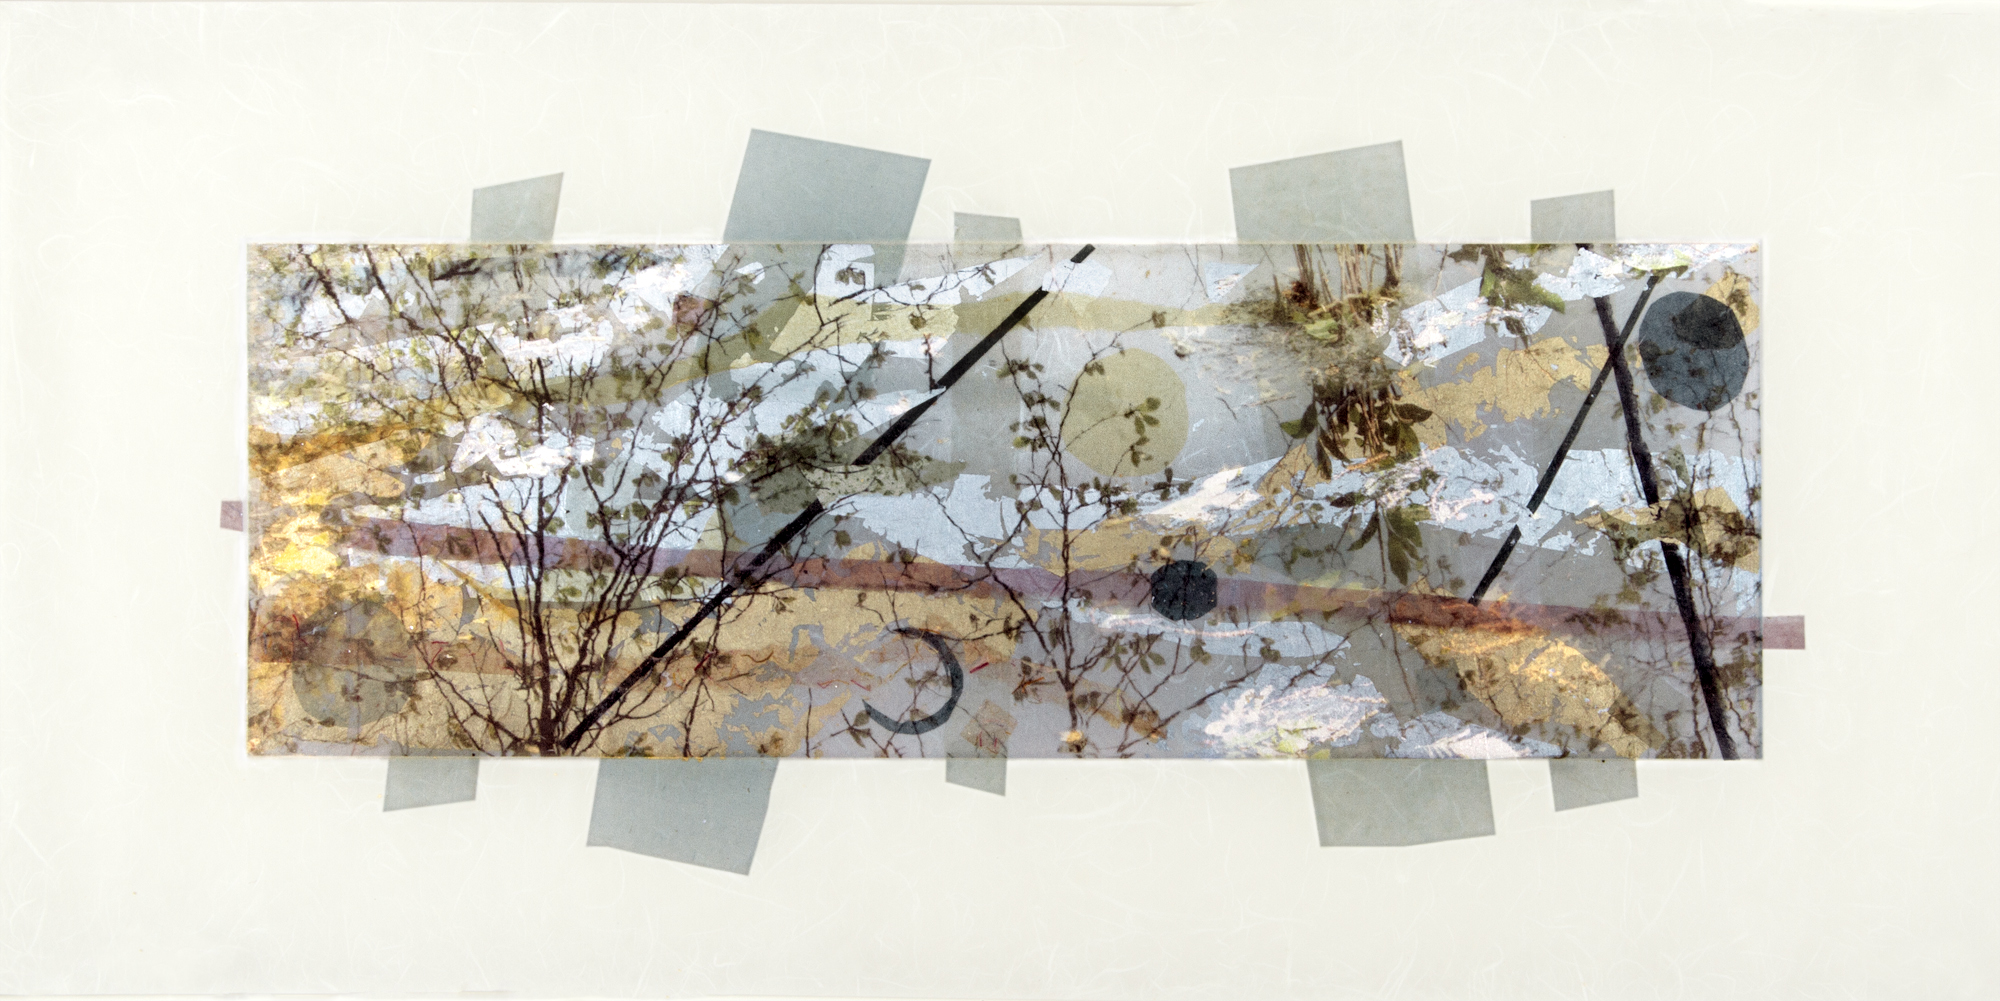   Kandinsky Thoughts II , Long Island, NY, 2014  Ink jet print on Japanese rice paper, rice papers, gold leaf, silver leaf, wax  14” x 28” 